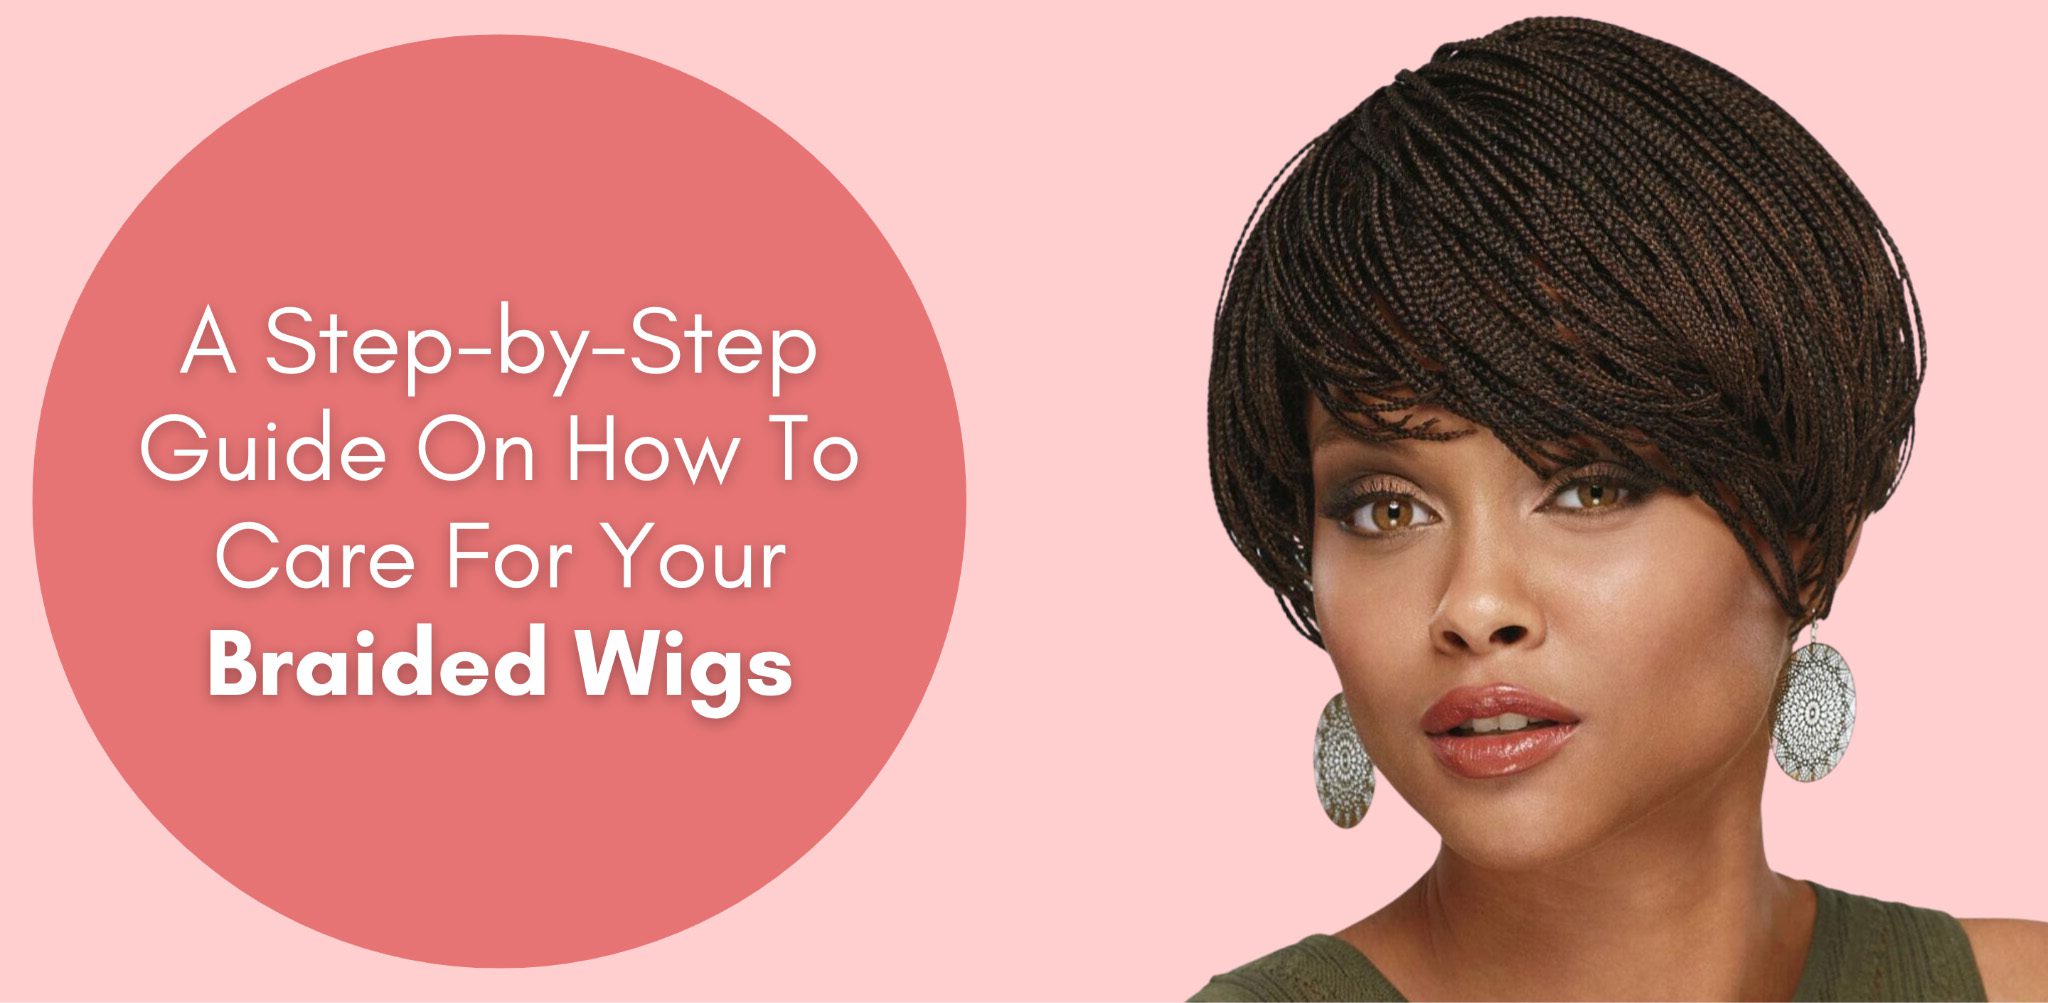 A Step-by-Step Guide On How To Care For Your Braided Wigs